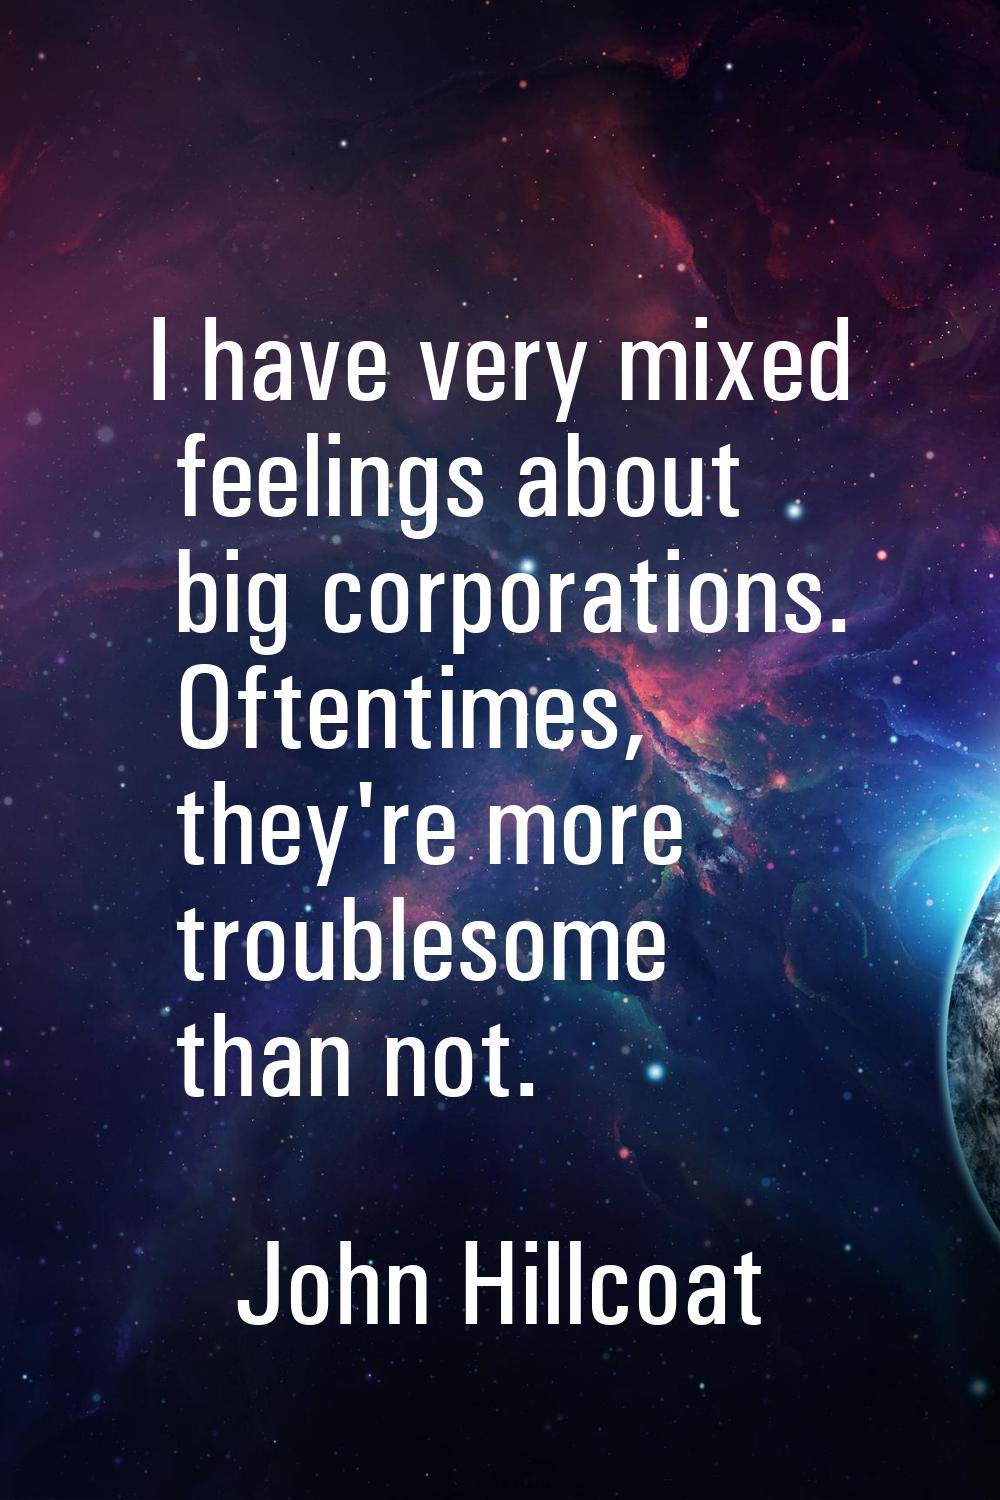 I have very mixed feelings about big corporations. Oftentimes, they're more troublesome than not.